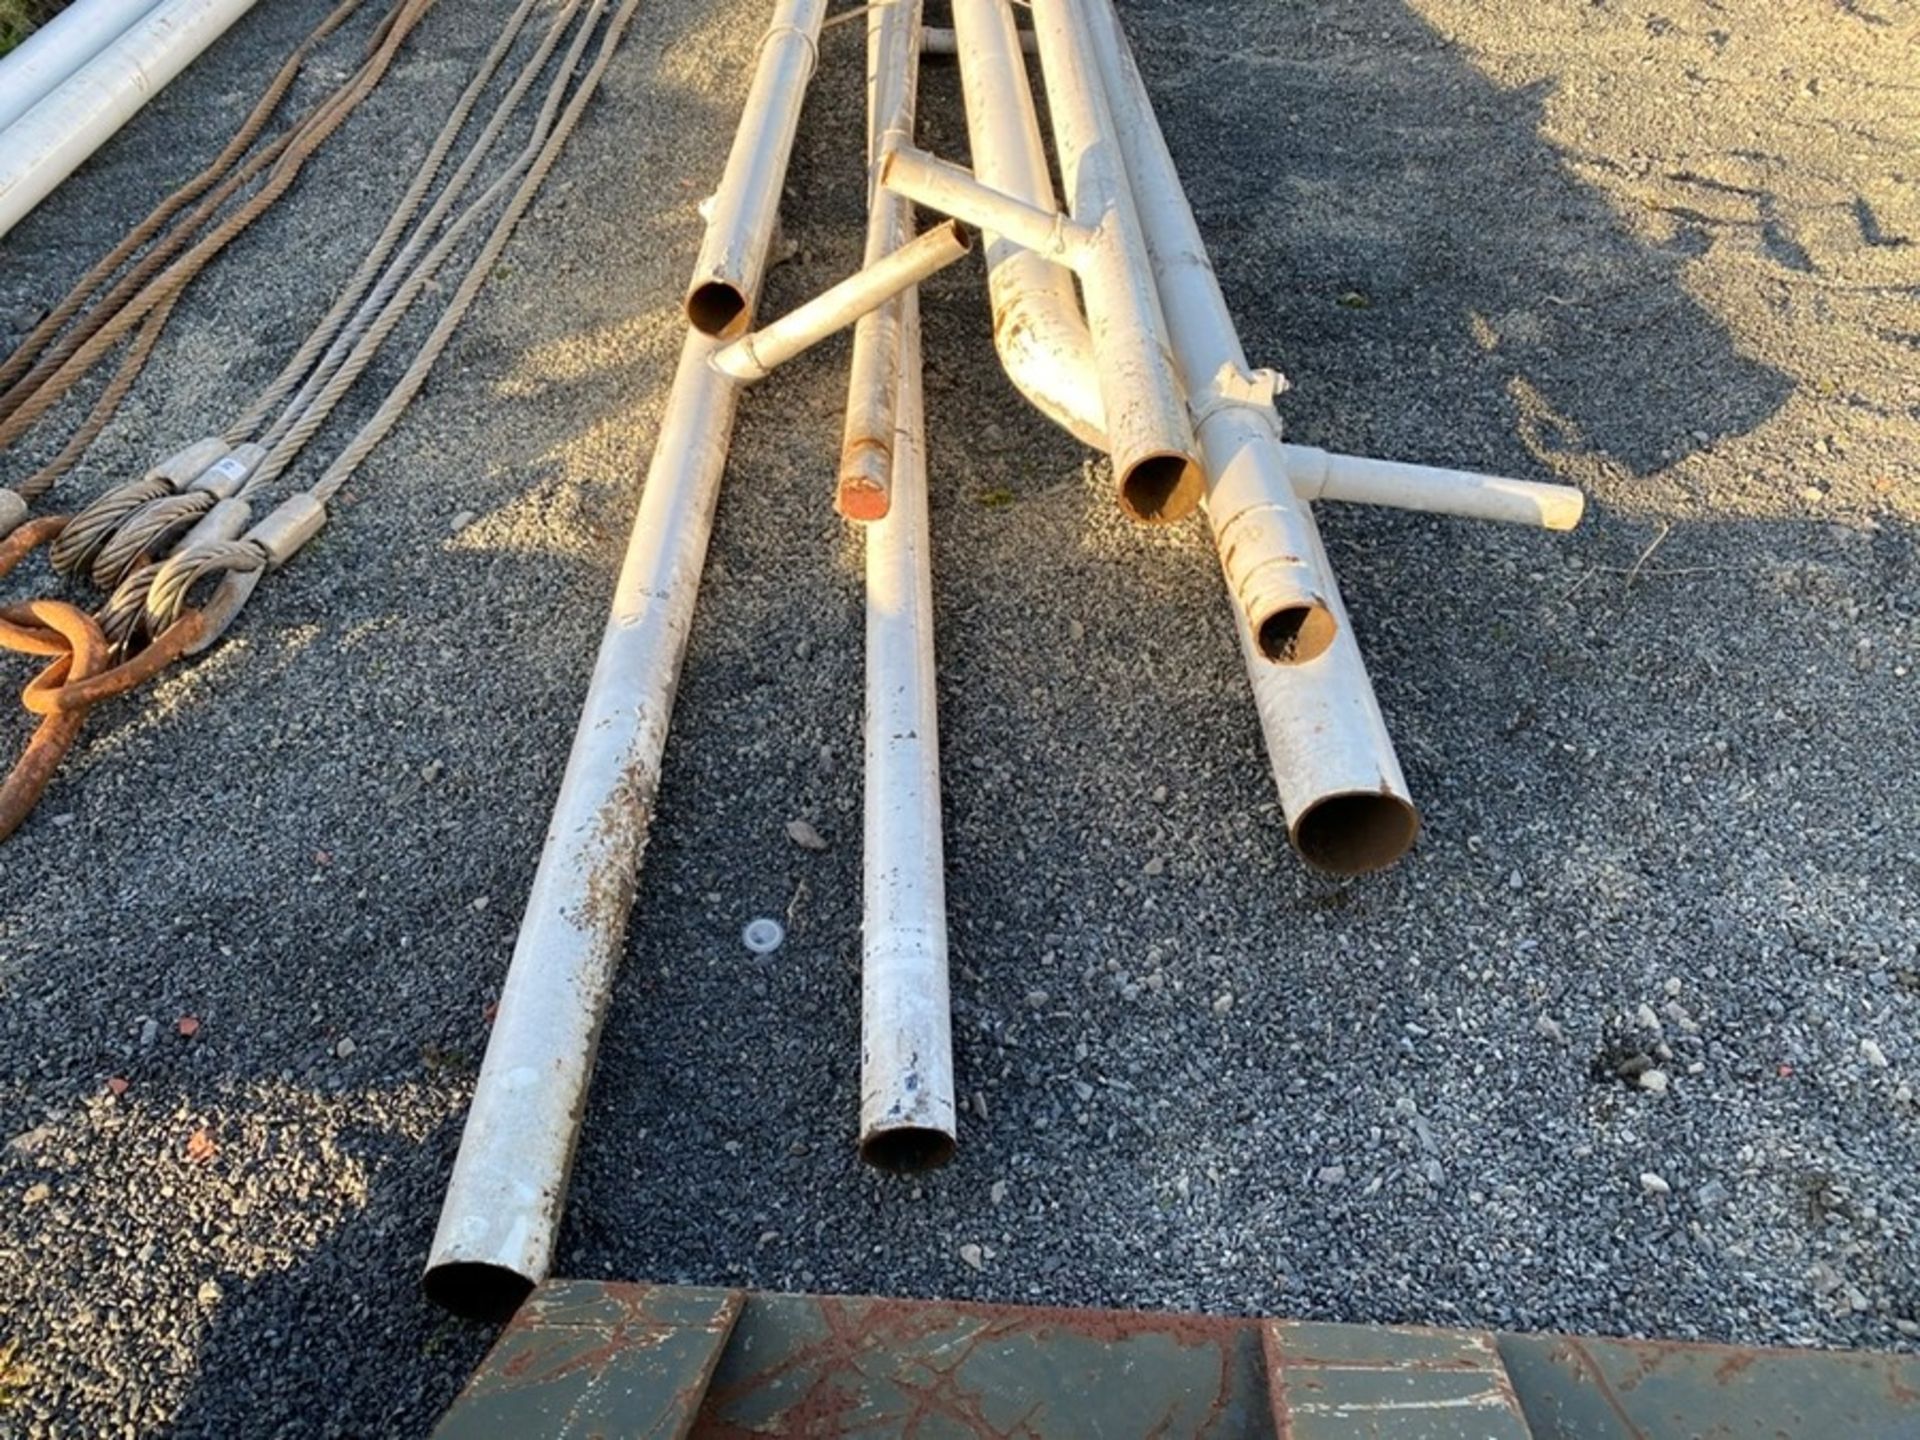 7X ASSORTED 3/4” HEAVY STEEL PIPING (15-20FT EACH) - Image 3 of 3